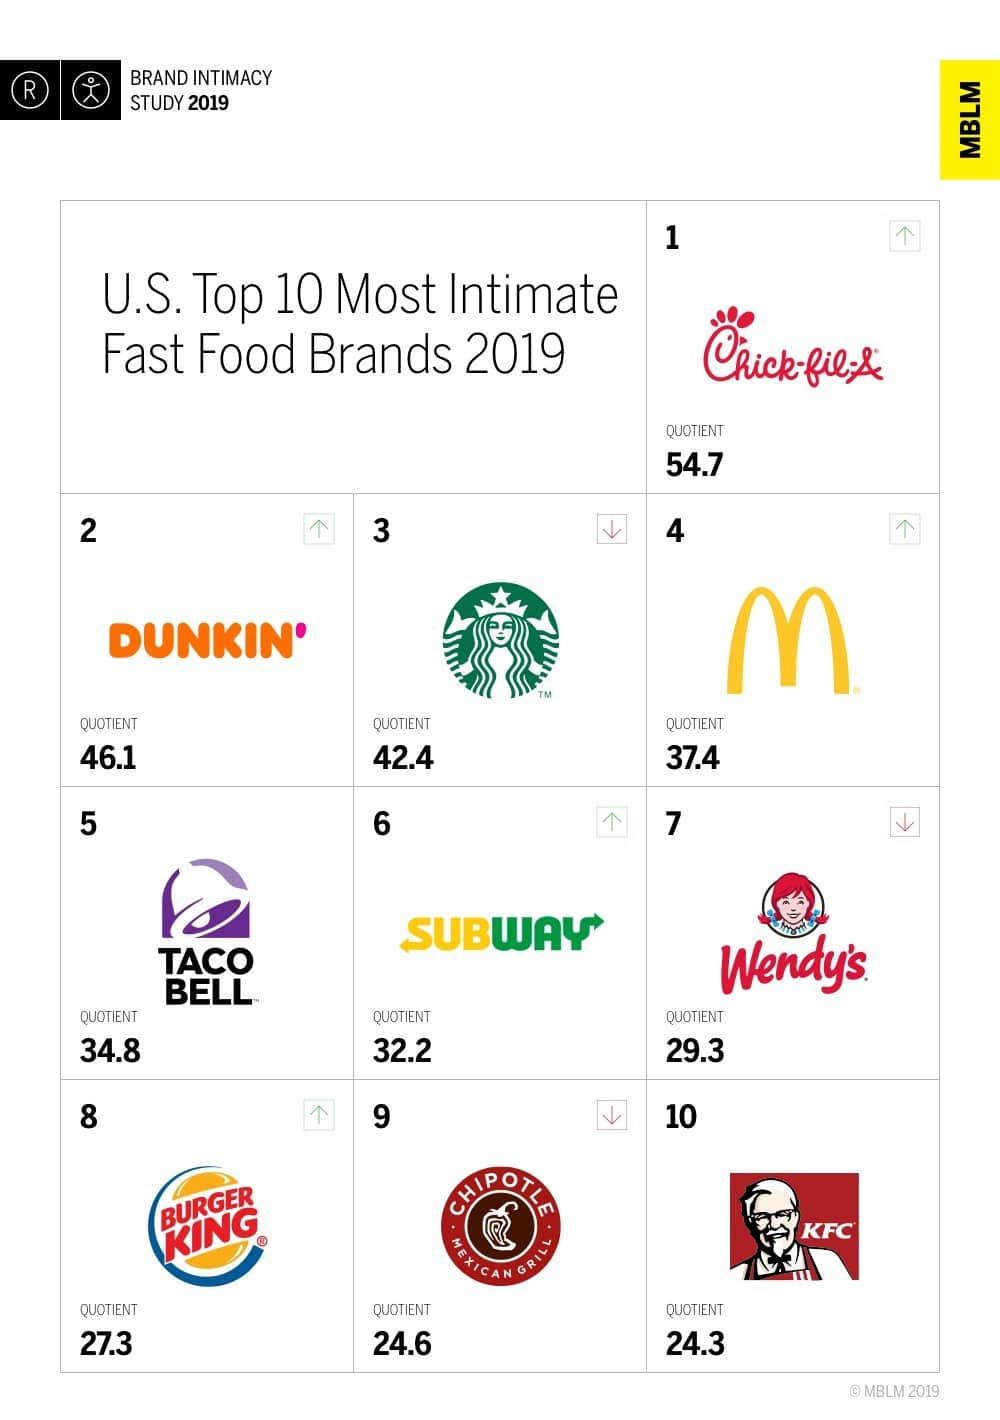 Amid controversy, Chick-fil-A ranks 1st in fast food brand intimacy